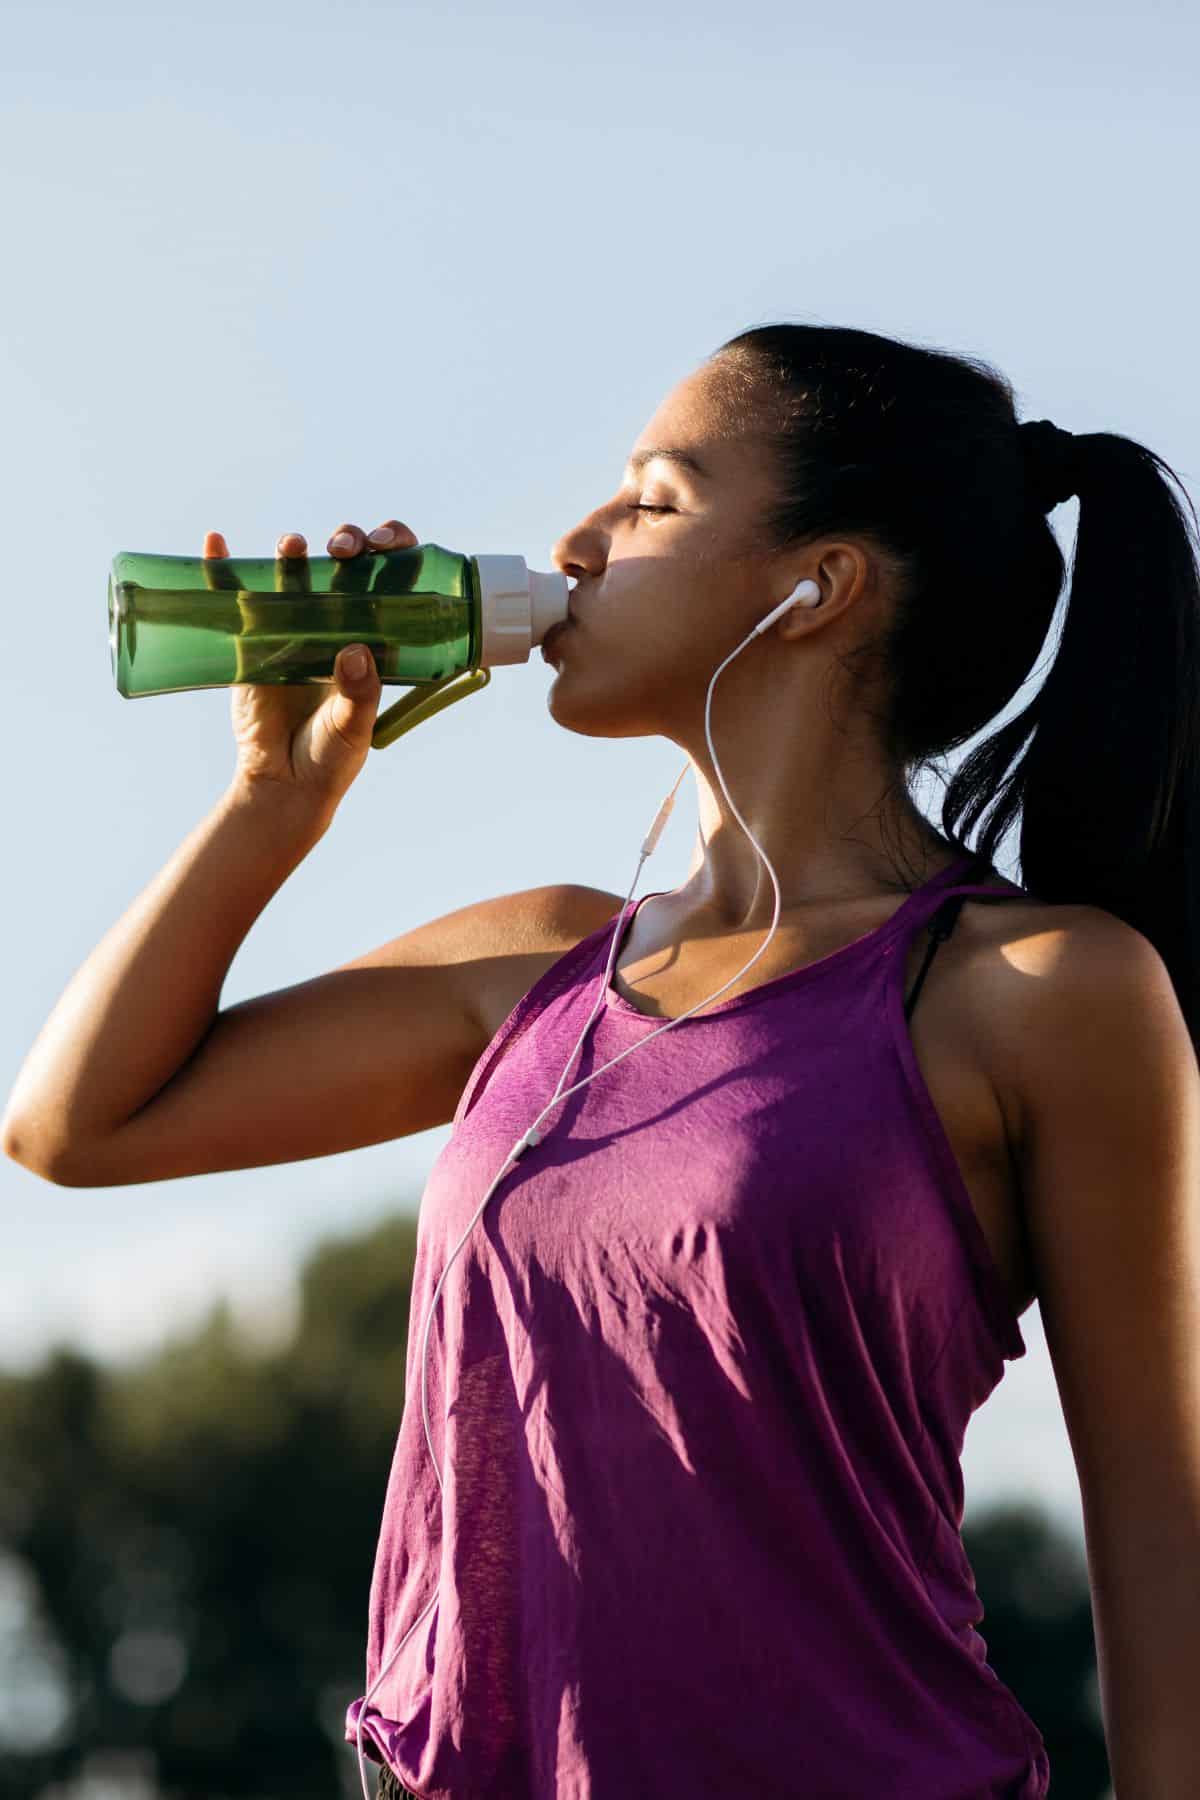 a woman drinking a drink while working out.